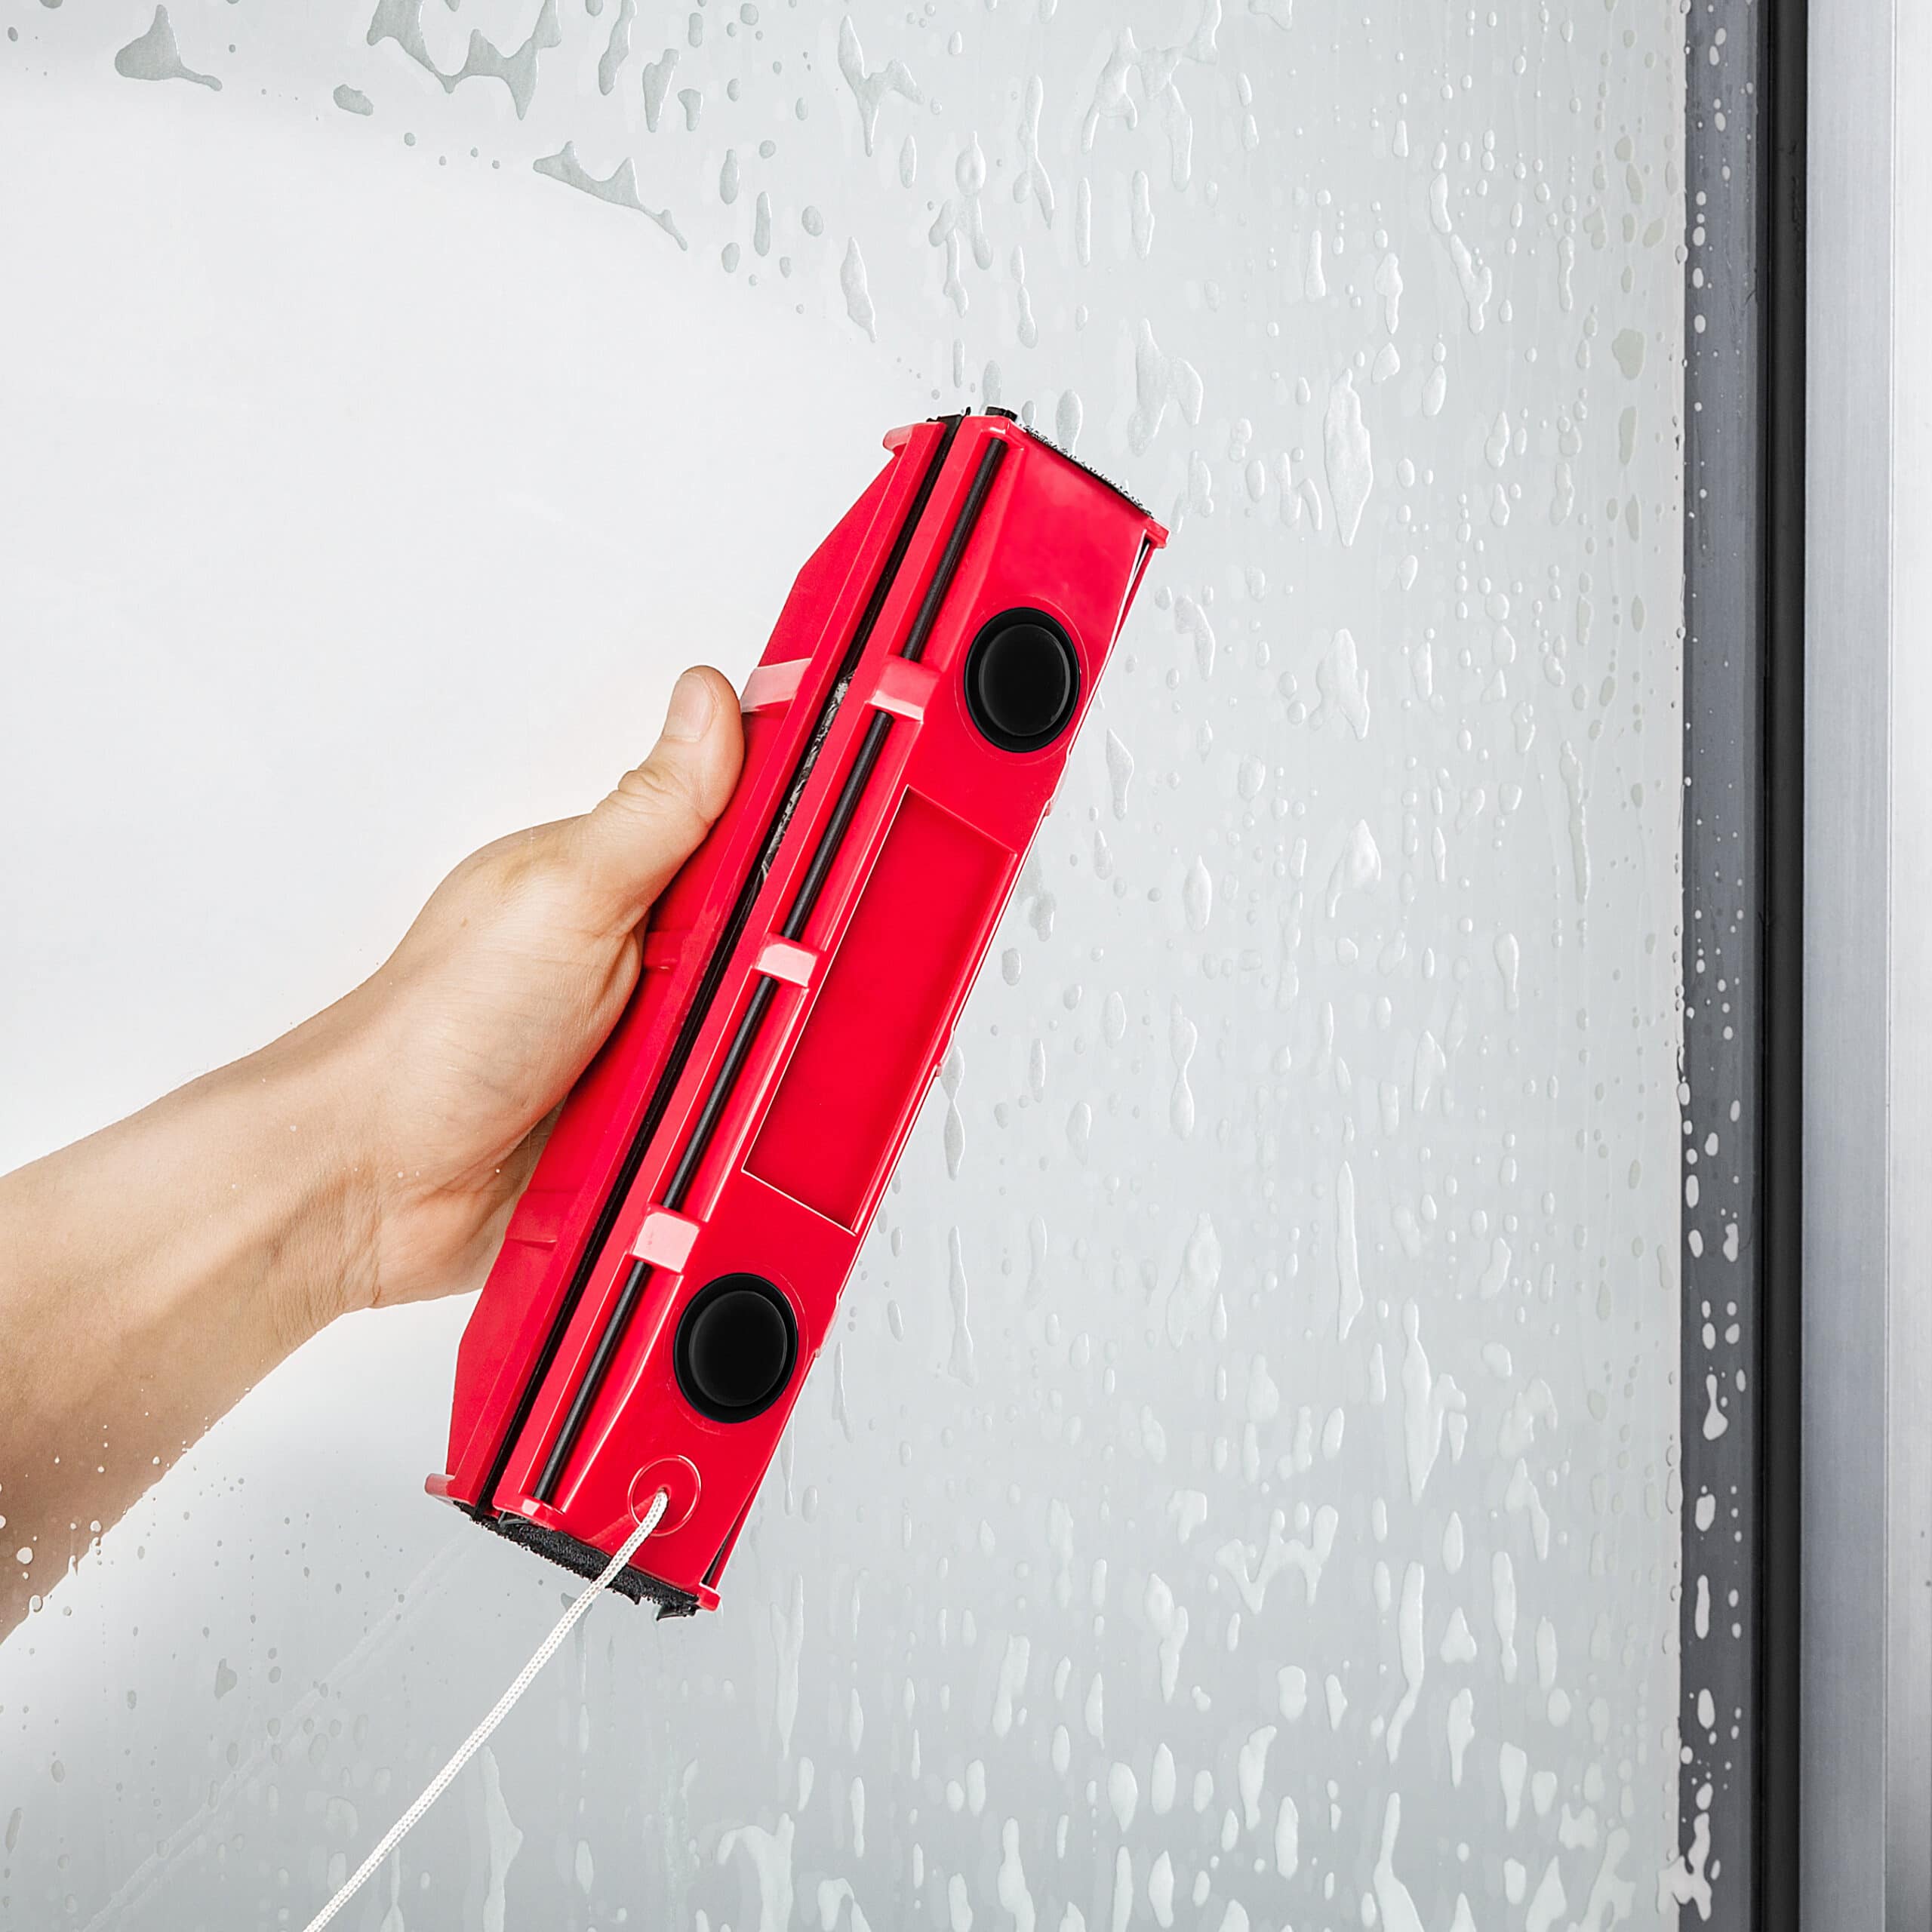 The Glider S1 magnetic window cleaner